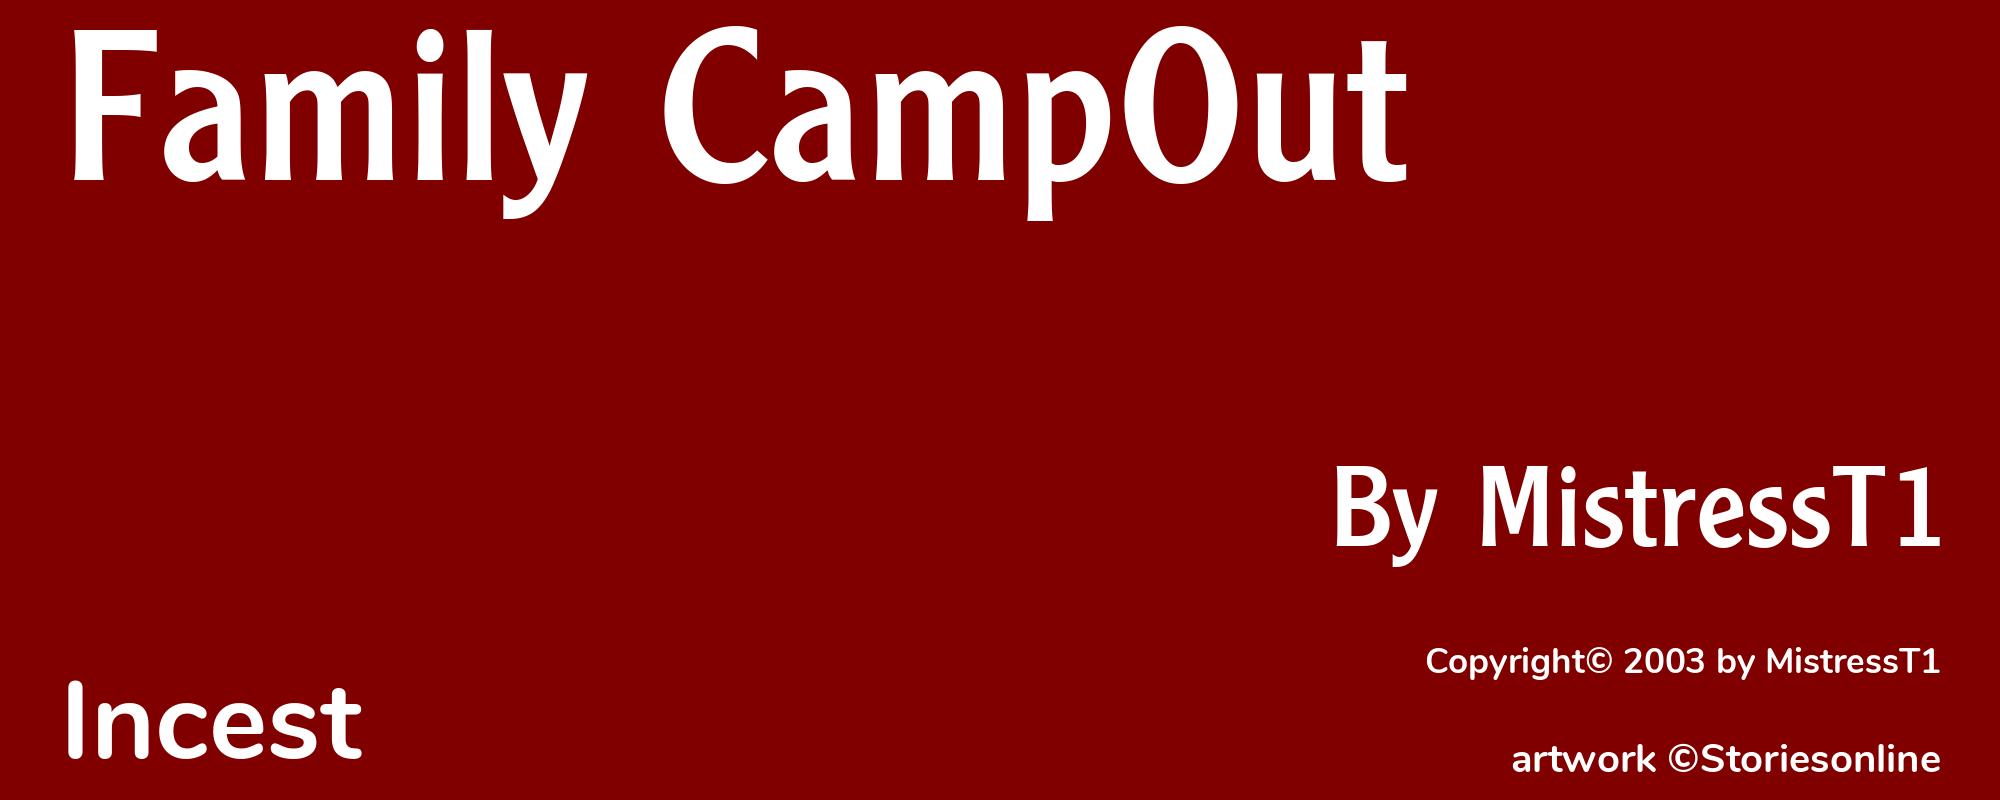 Family CampOut - Cover